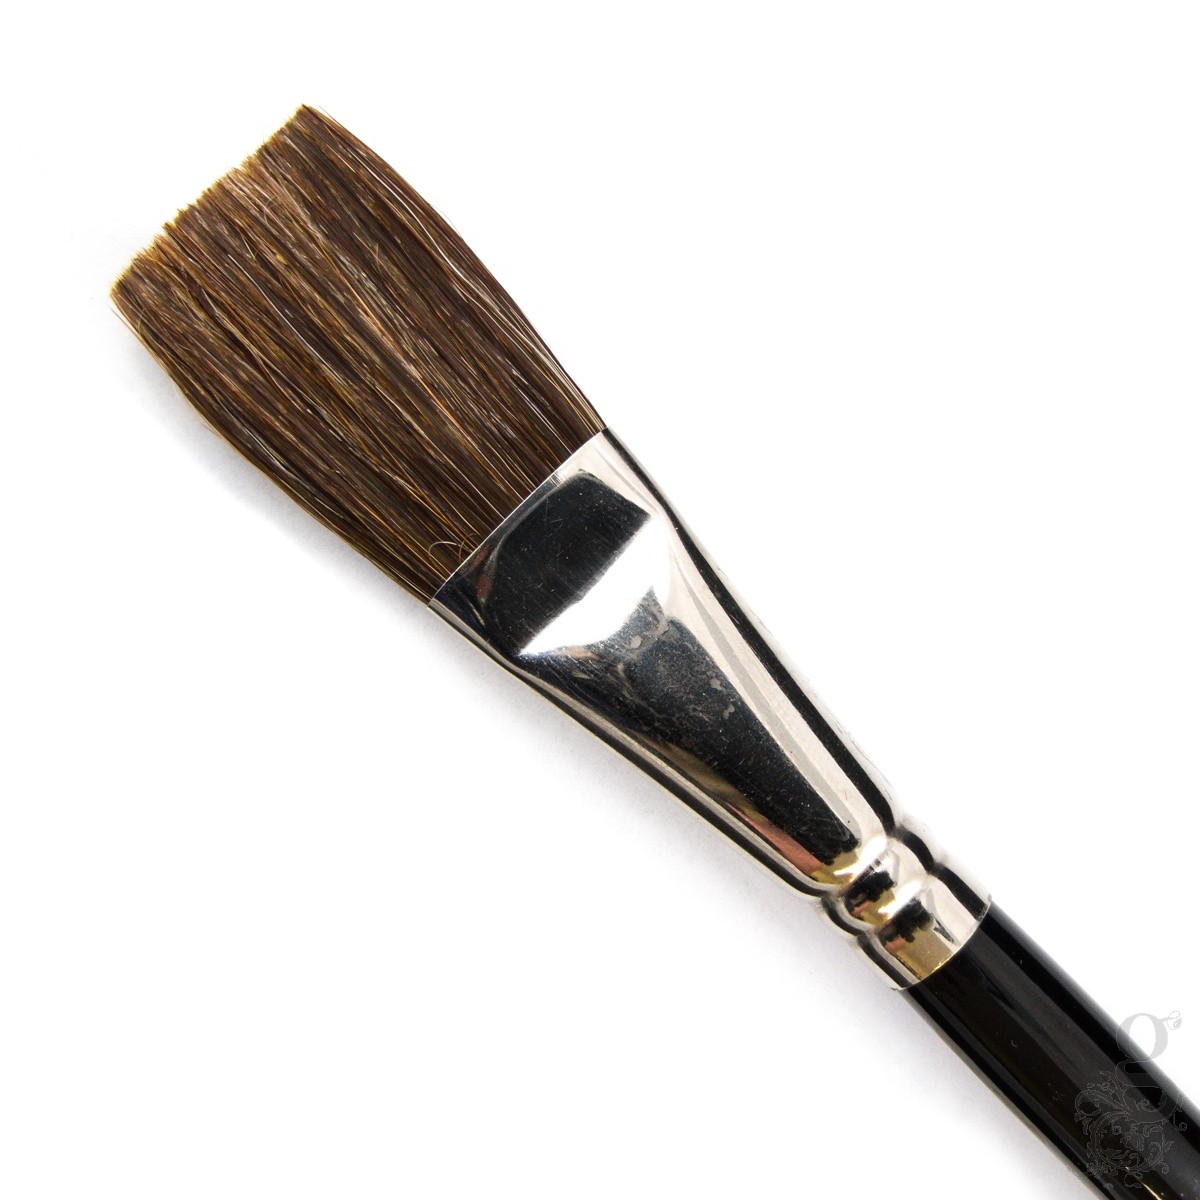 Poster Brush - Brown Ox hair - One Stroke - Size 8 - Gold Leaf Supplies